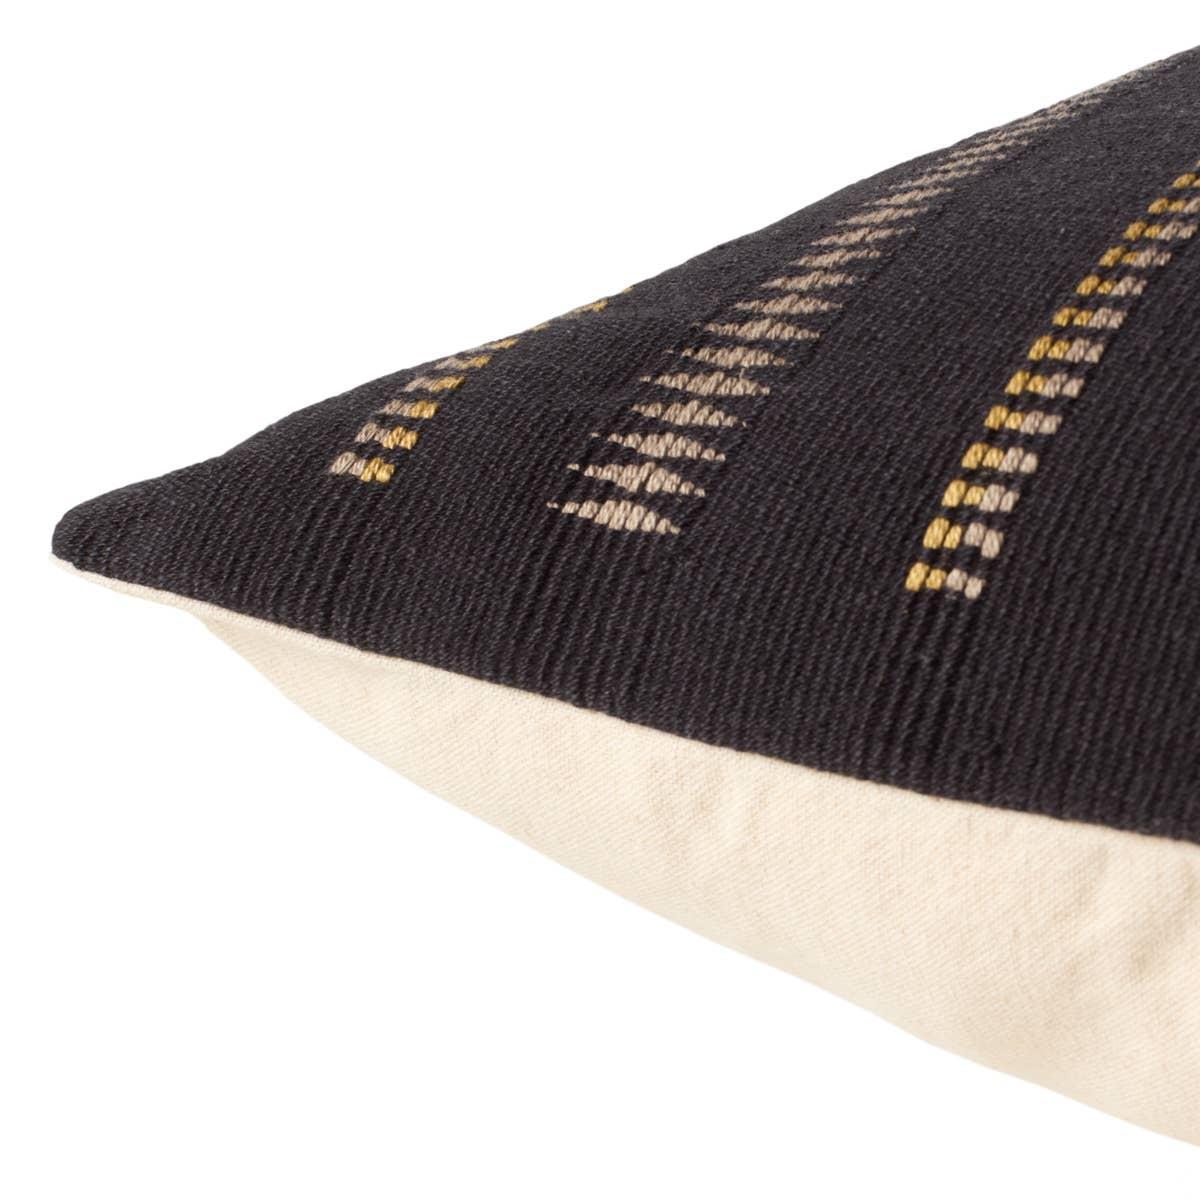 Handmade by weavers in Nagaland, India, the Nagaland Dzukou showcases the traditional loin-loom techniques of the indigenous tribes of the region. The artisan-made Dzukou throw pillow effortlessly combines heritage-rich tribal and stripe patterns with a black, taupe, and gold colorway for a stunning statement in any space. Amethyst Home provides interior design, new home construction design consulting, vintage area rugs, and lighting in the Washington metro area.